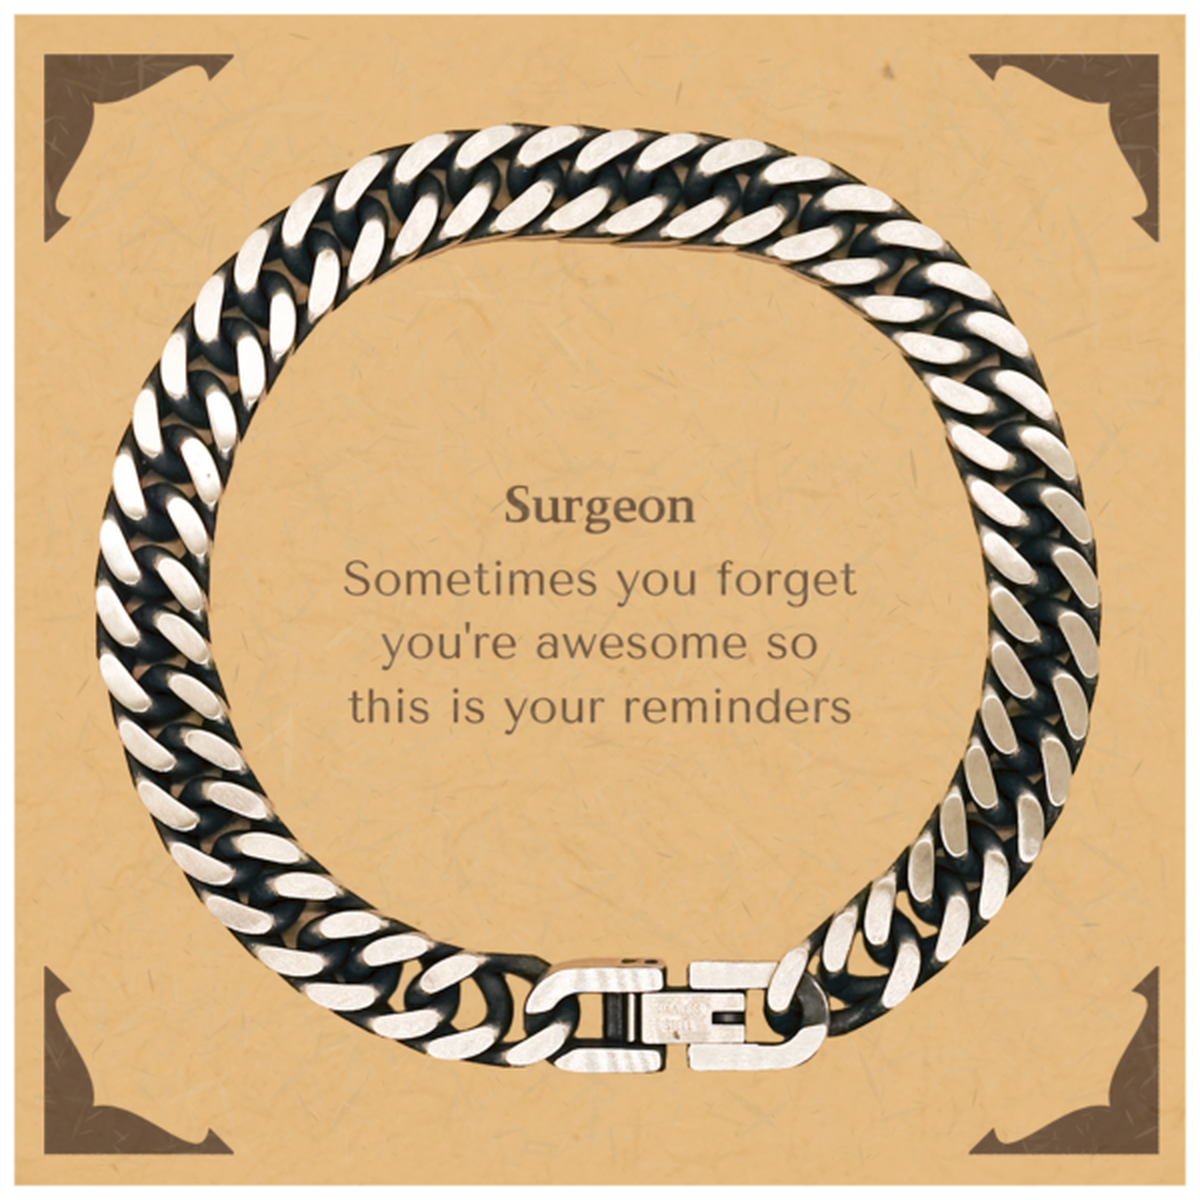 Sentimental Surgeon Cuban Link Chain Bracelet, Surgeon Sometimes you forget you're awesome so this is your reminders, Graduation Christmas Birthday Gifts for Surgeon, Men, Women, Coworkers